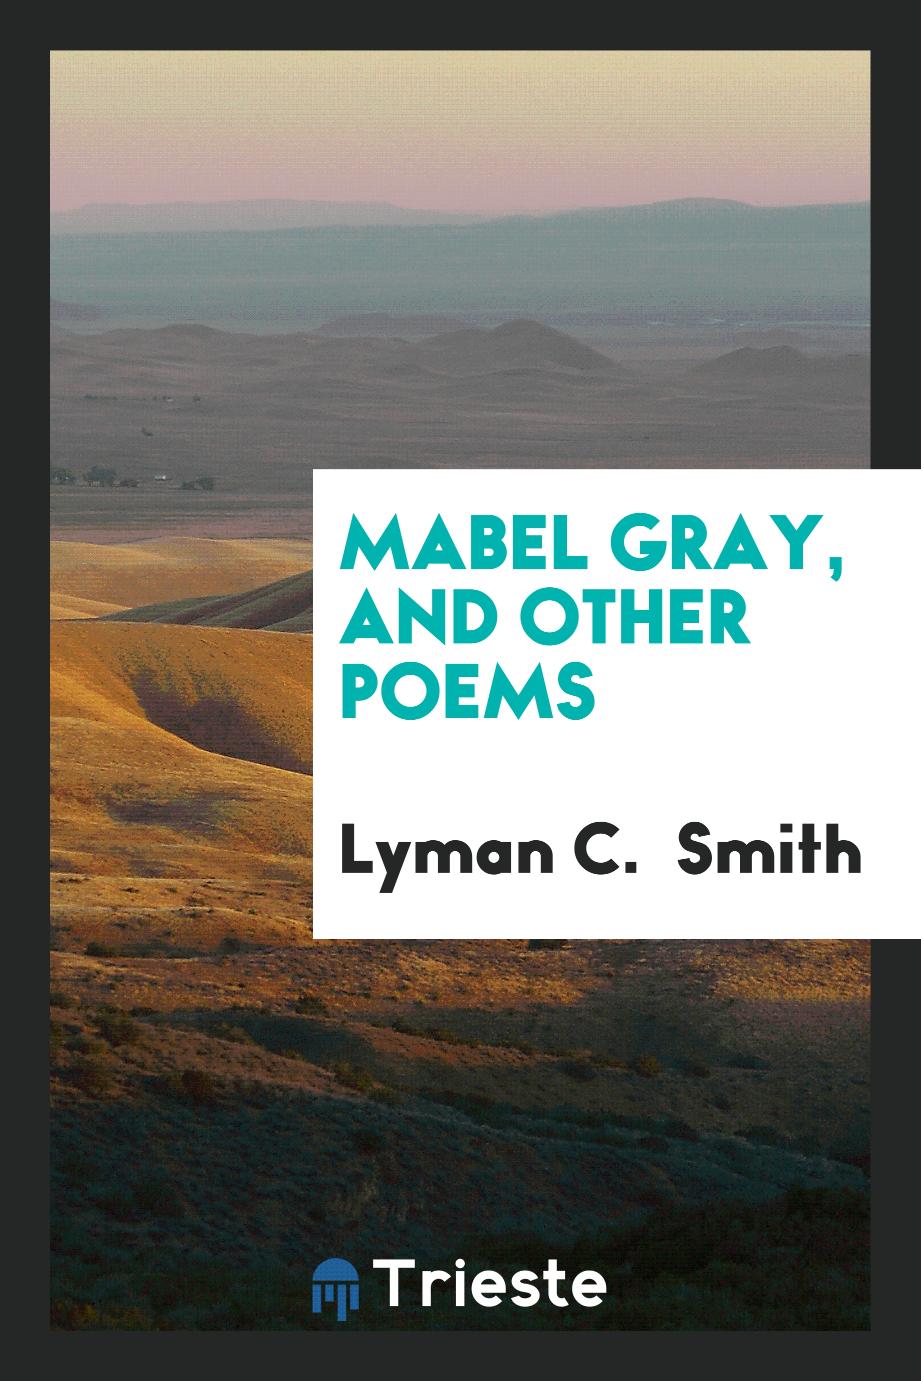 Mabel Gray, and Other Poems